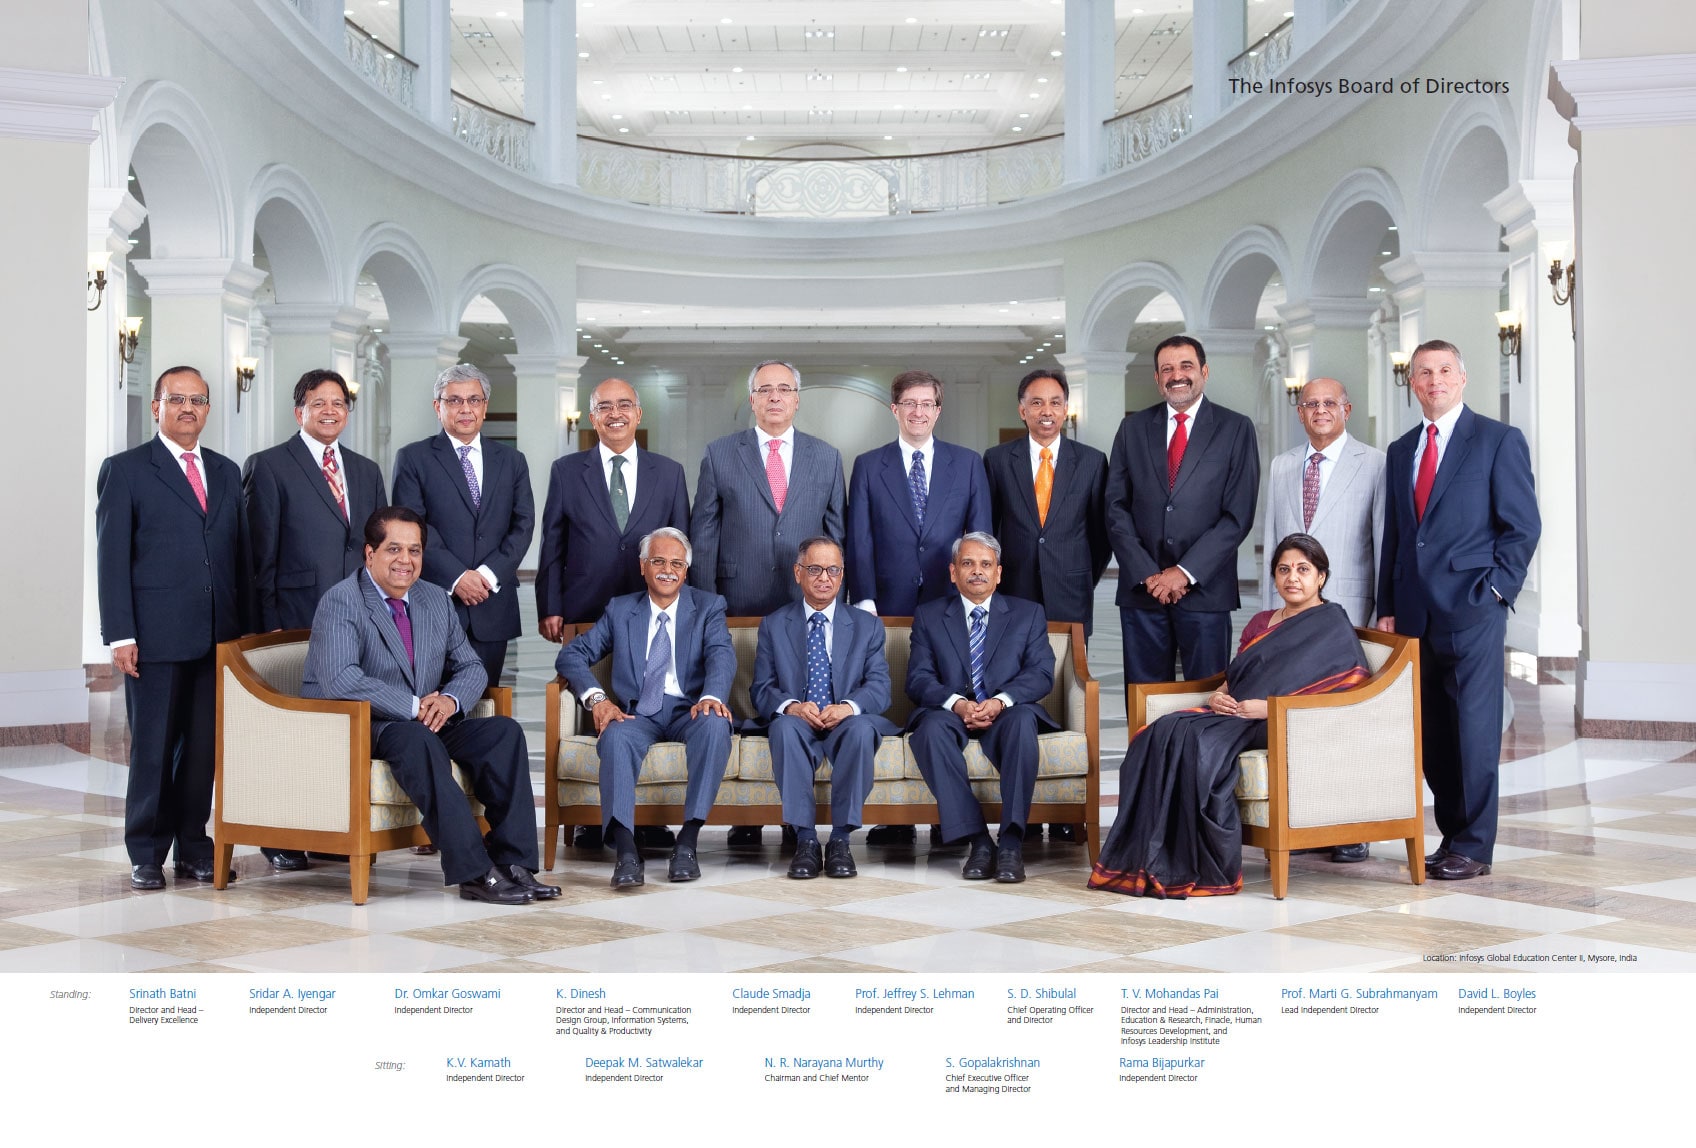 The Infosys Board of Directors